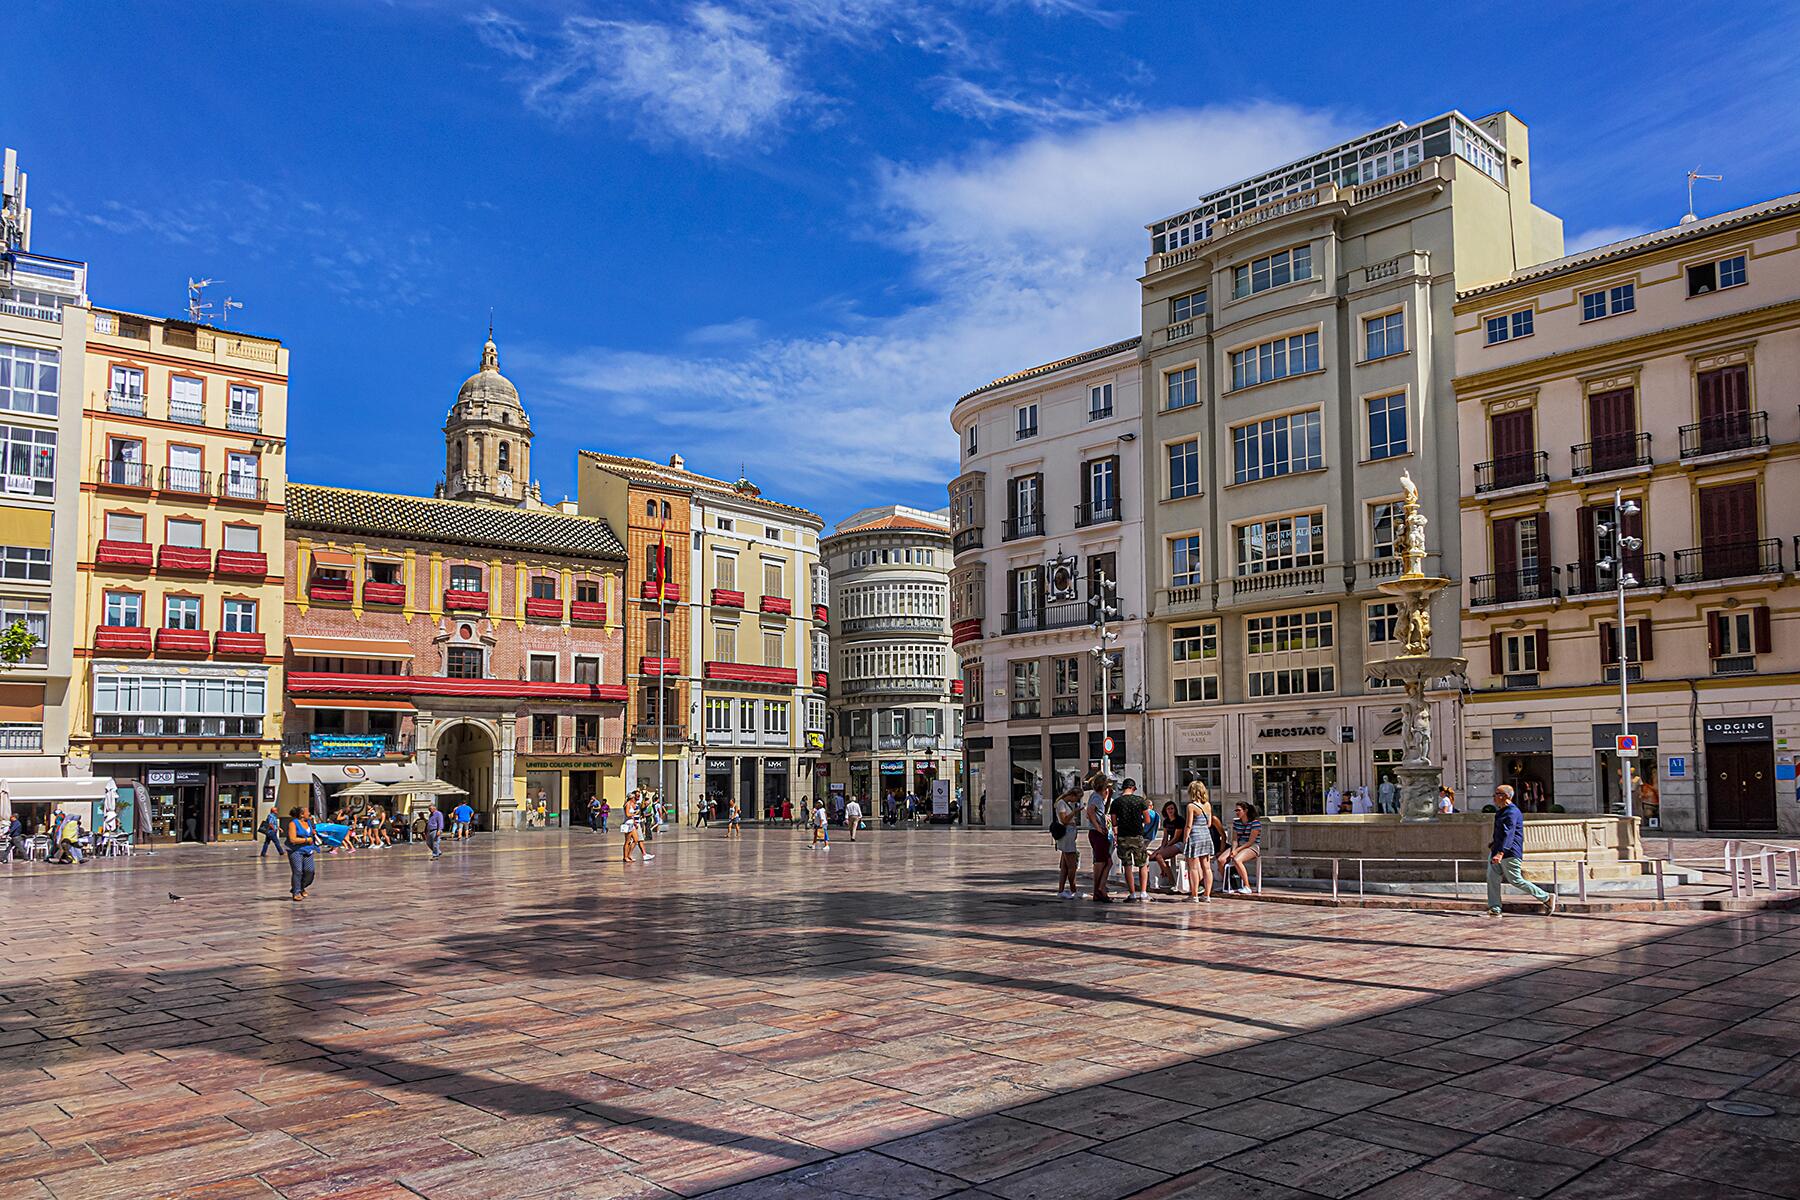 Want To Move To Spain? You Could Possibly Be Saving Hundreds or